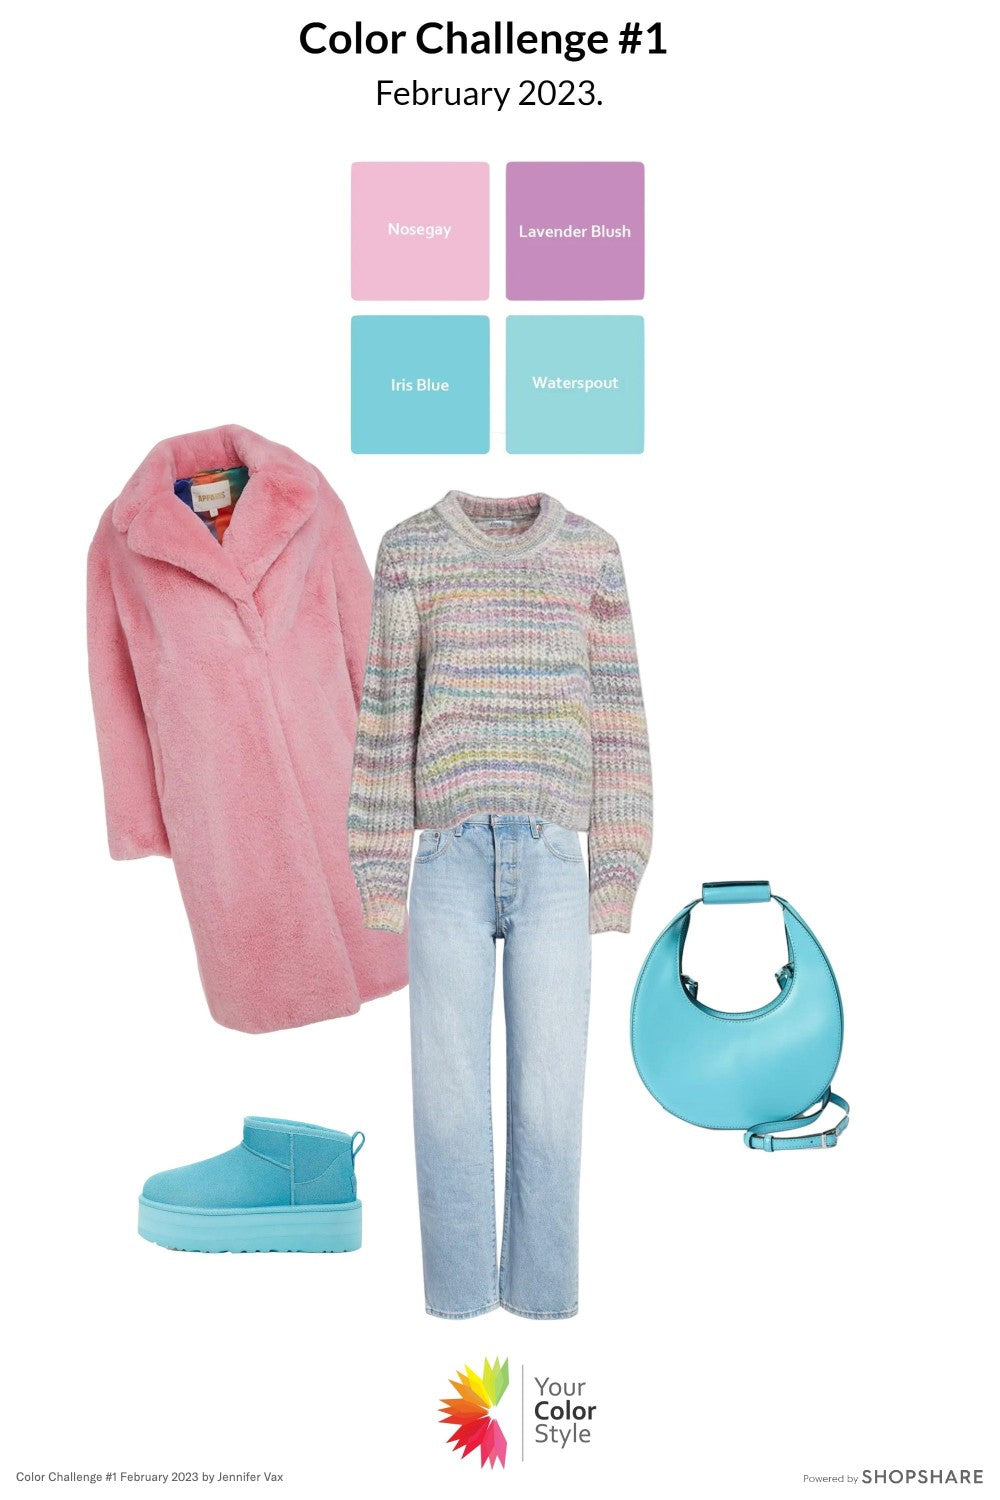 Outfit inspiration for the February 2023 Color Challenge - Your Color Style